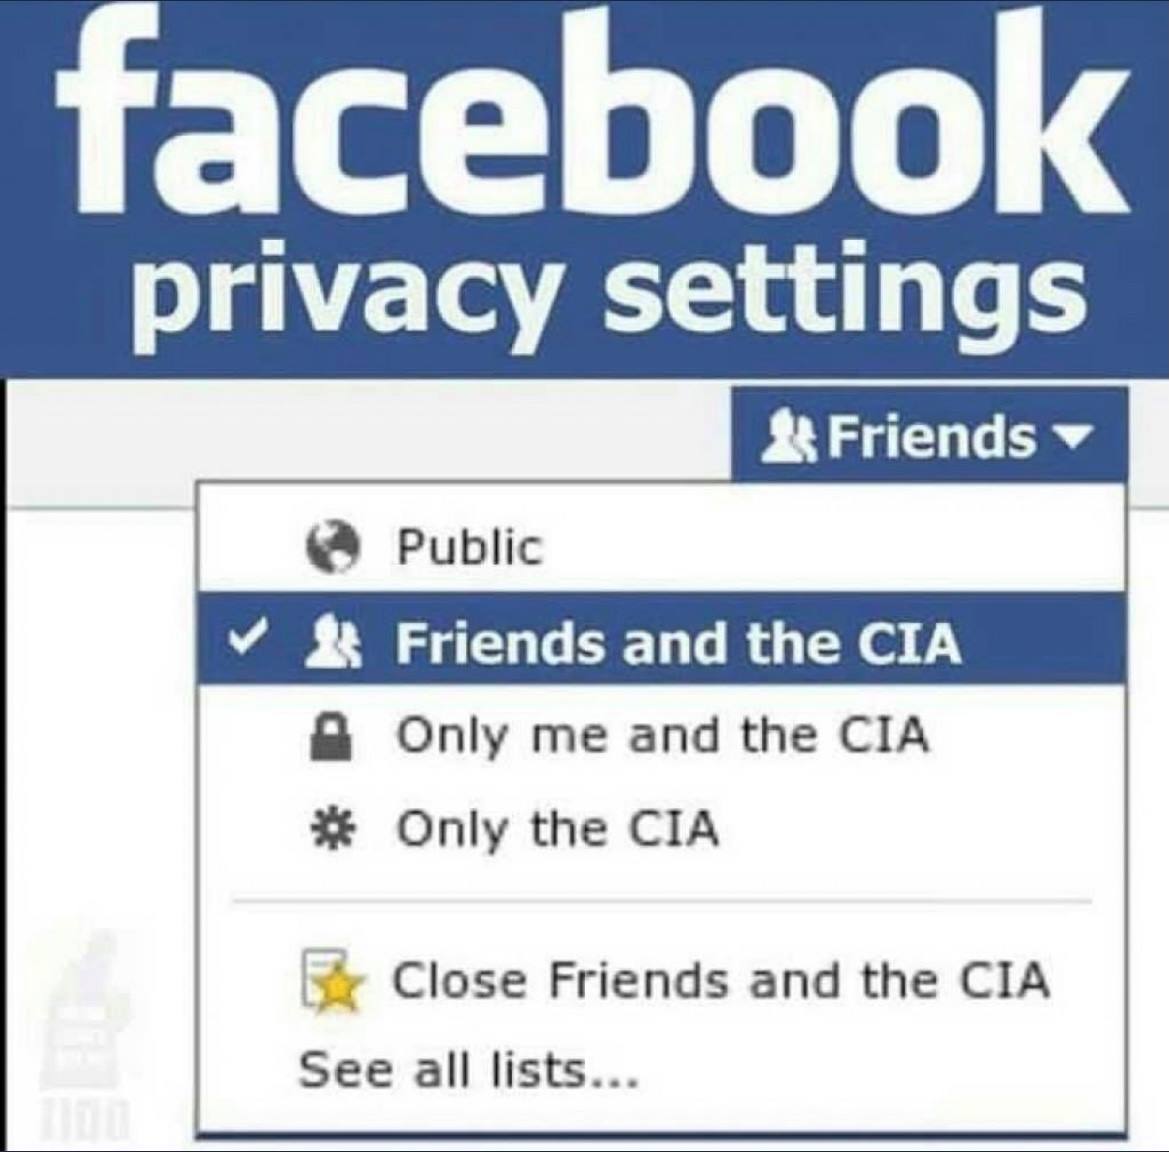 cinepolis plaza el prado - facebook privacy settings & Friends Public & Friends and the Cia A Only me and the Cia Only the Cia Close Friends and the Cia See all lists...